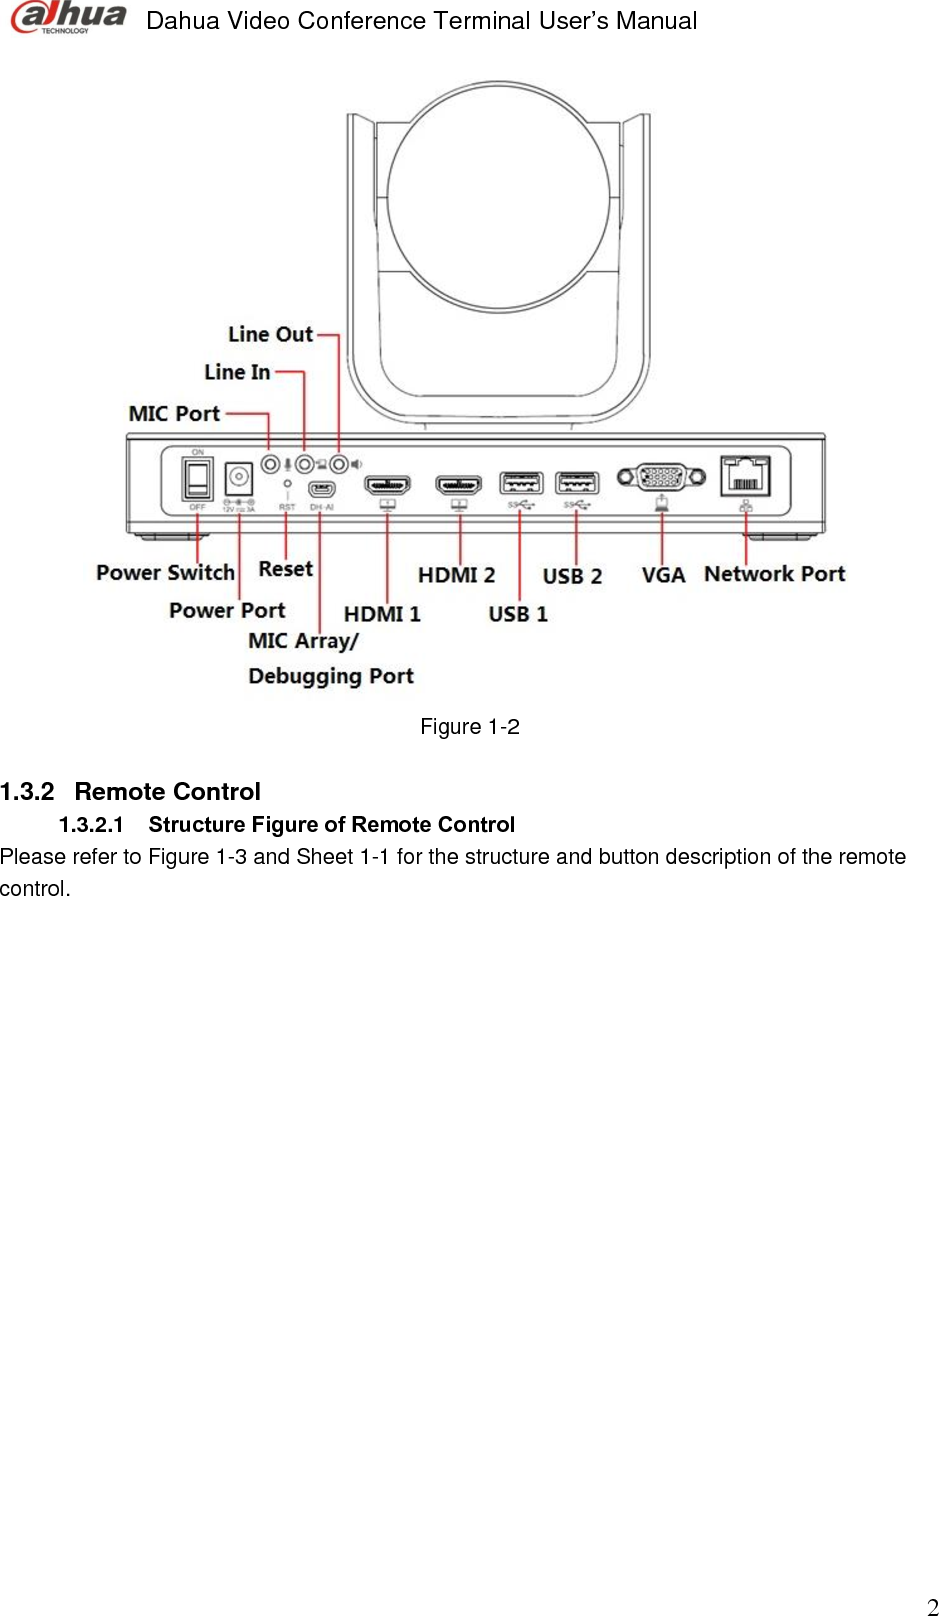  Dahua Video Conference Terminal User’s Manual                                                                              2  Figure 1-2  1.3.2  Remote Control  1.3.2.1  Structure Figure of Remote Control  Please refer to Figure 1-3 and Sheet 1-1 for the structure and button description of the remote control.  